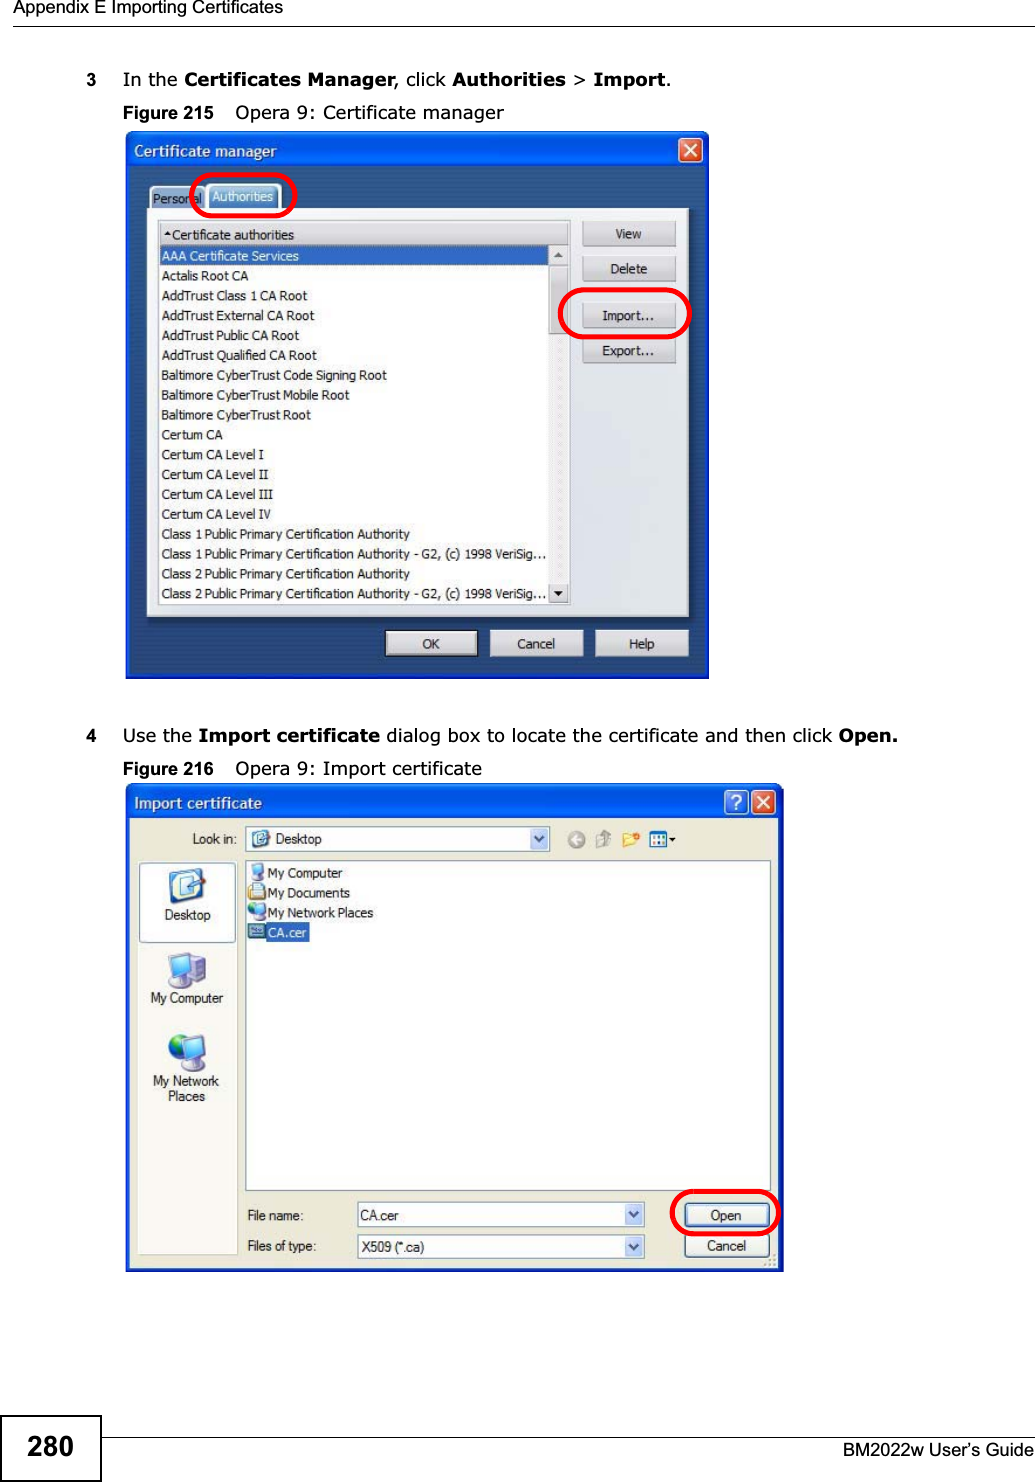 Appendix E Importing CertificatesBM2022w User’s Guide2803In the Certificates Manager, click Authorities &gt; Import.Figure 215    Opera 9: Certificate manager4Use the Import certificate dialog box to locate the certificate and then click Open.Figure 216    Opera 9: Import certificate